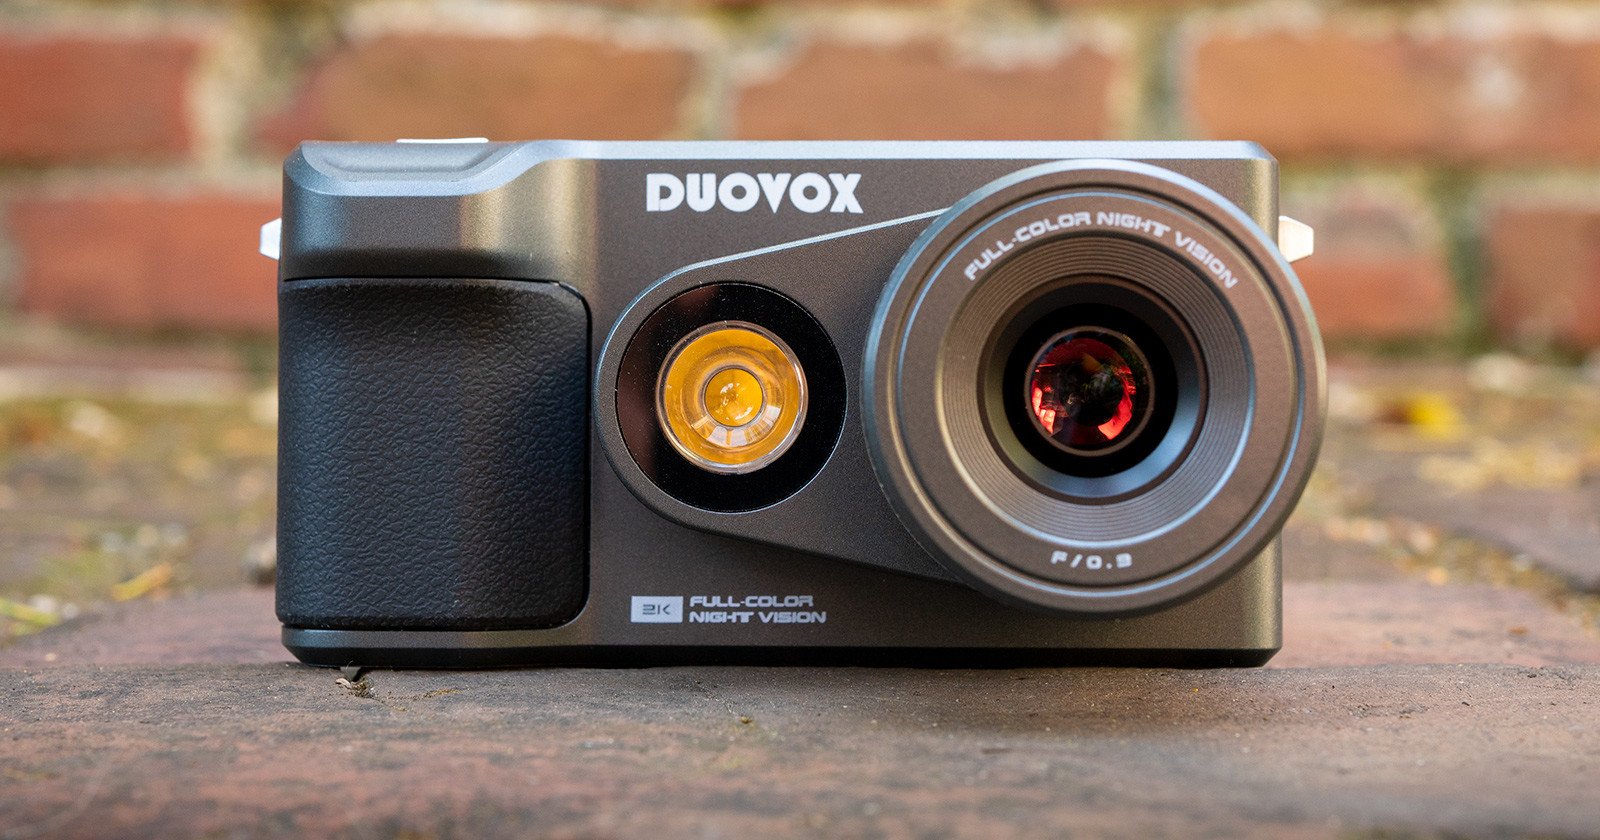 Duovox Mate Pro Camera Can Capture Full Color in Near Pitch Darkness